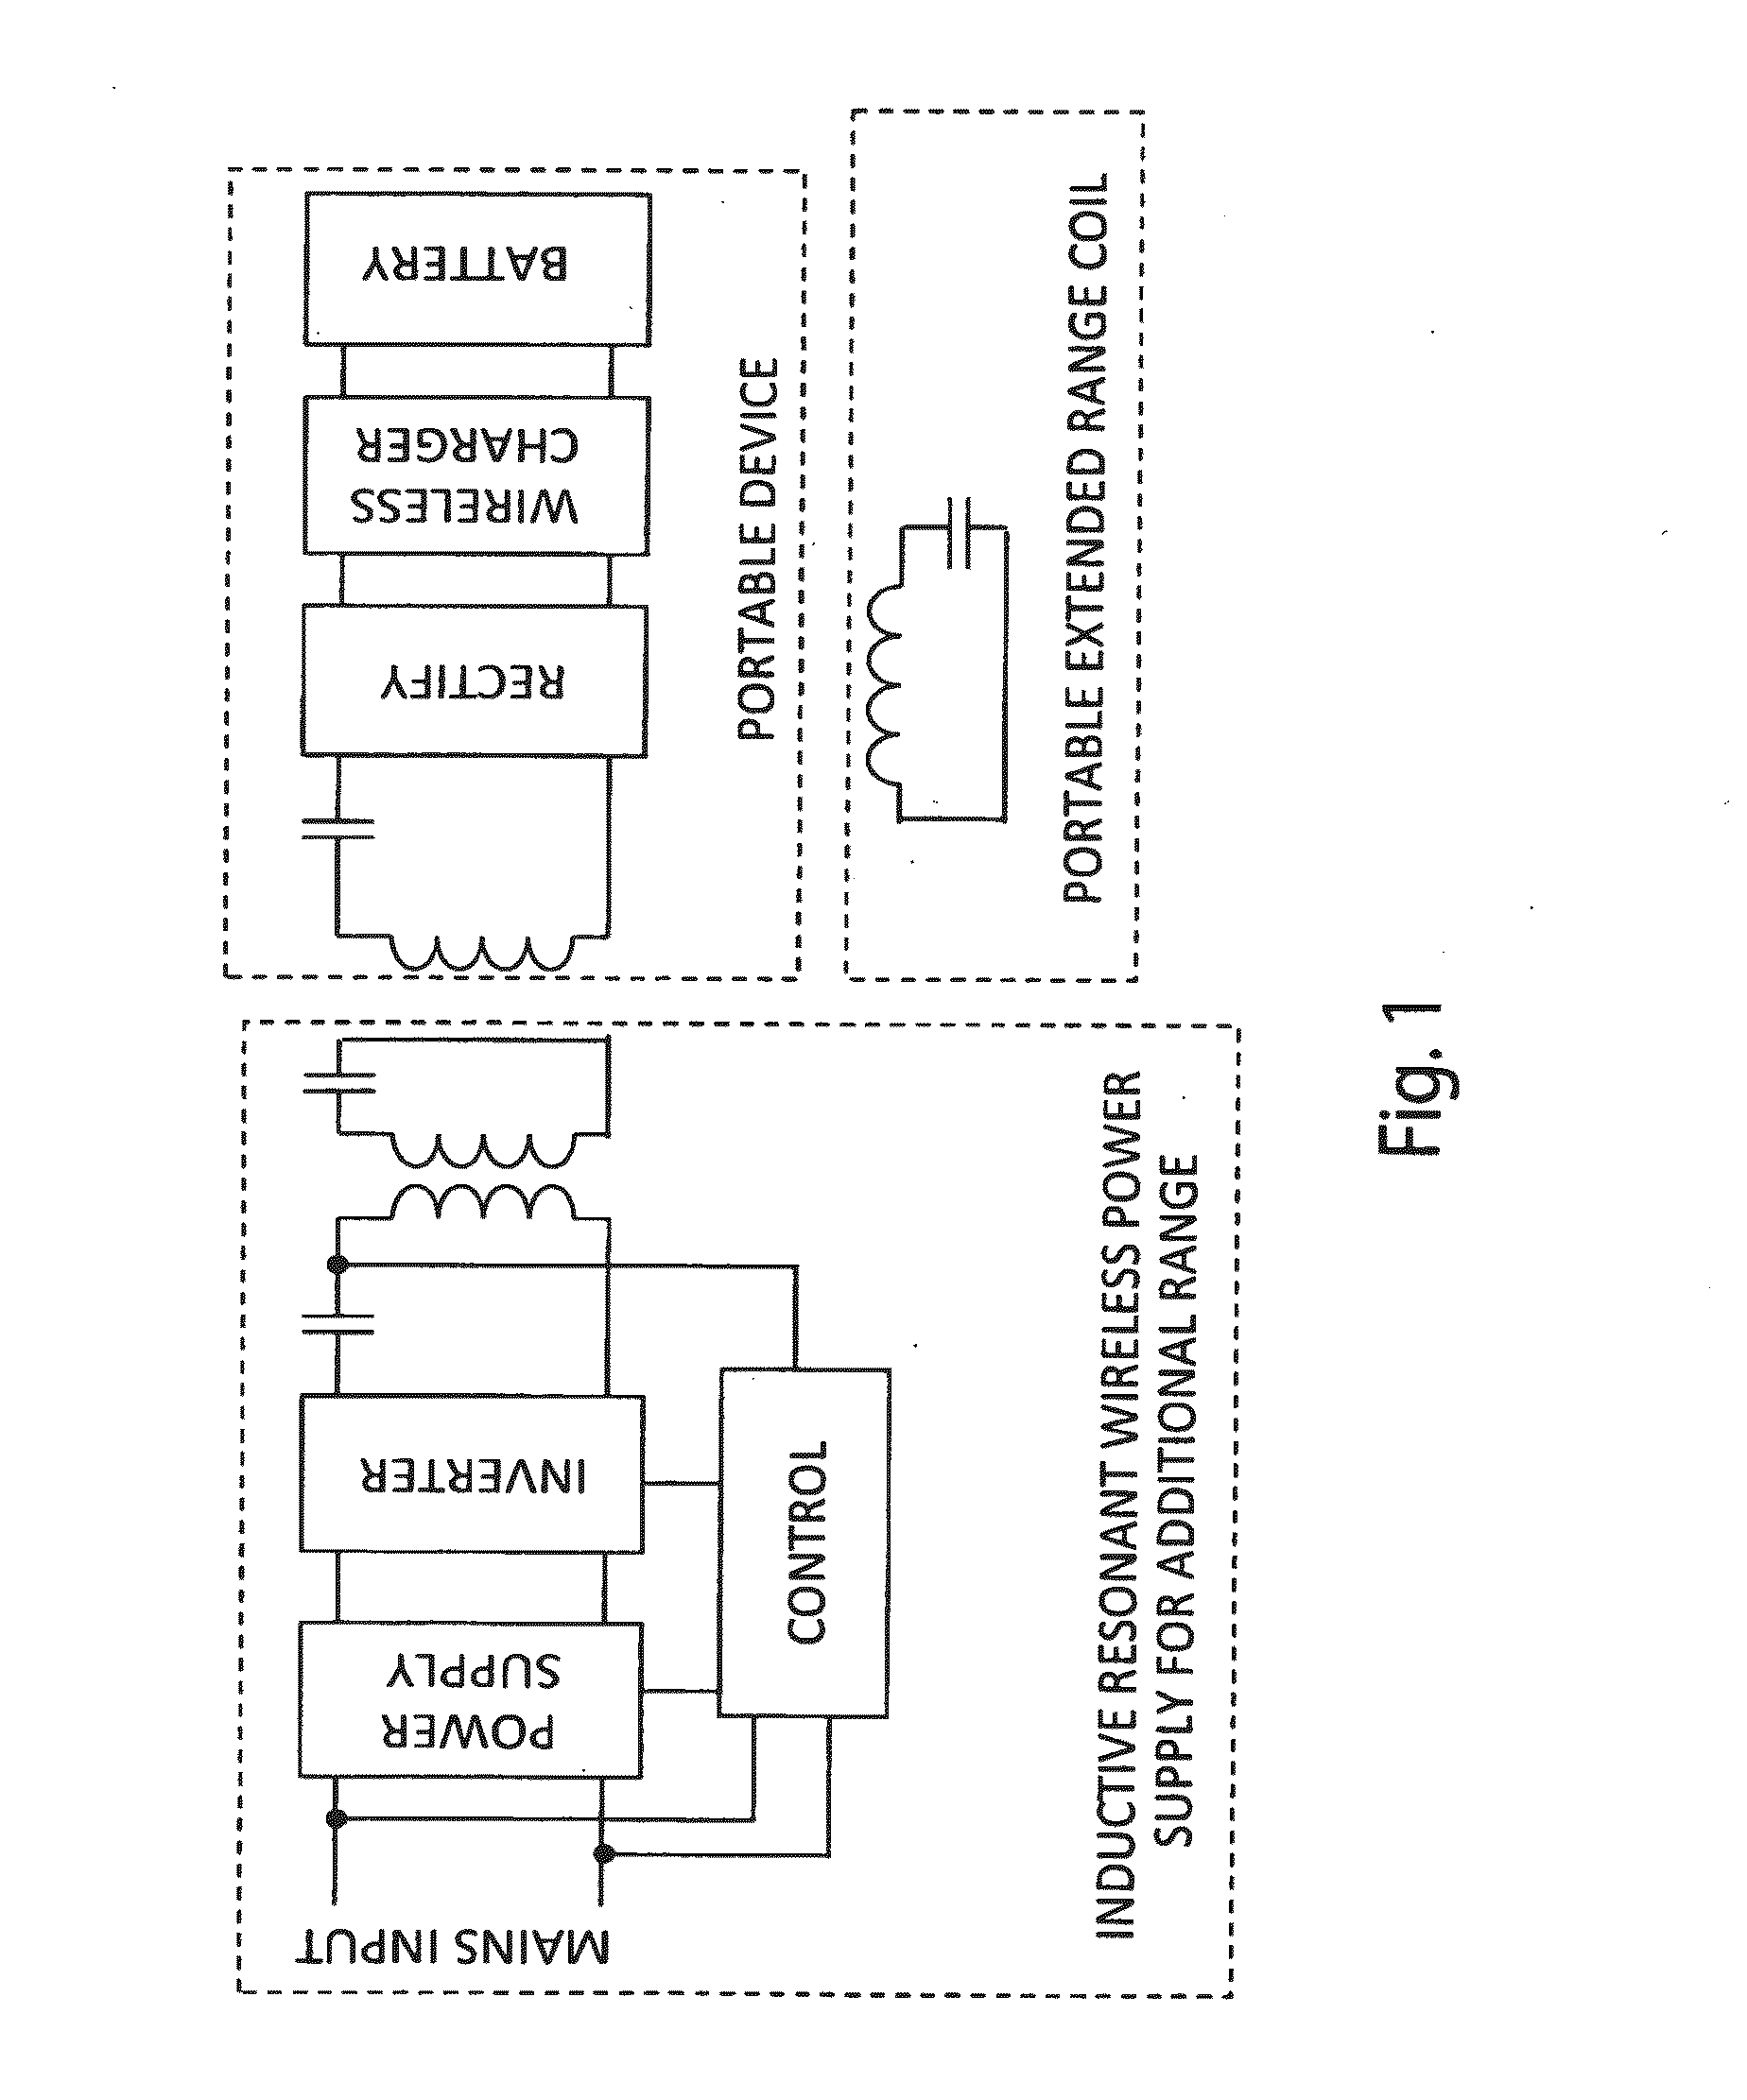 Behavior tracking and modification system